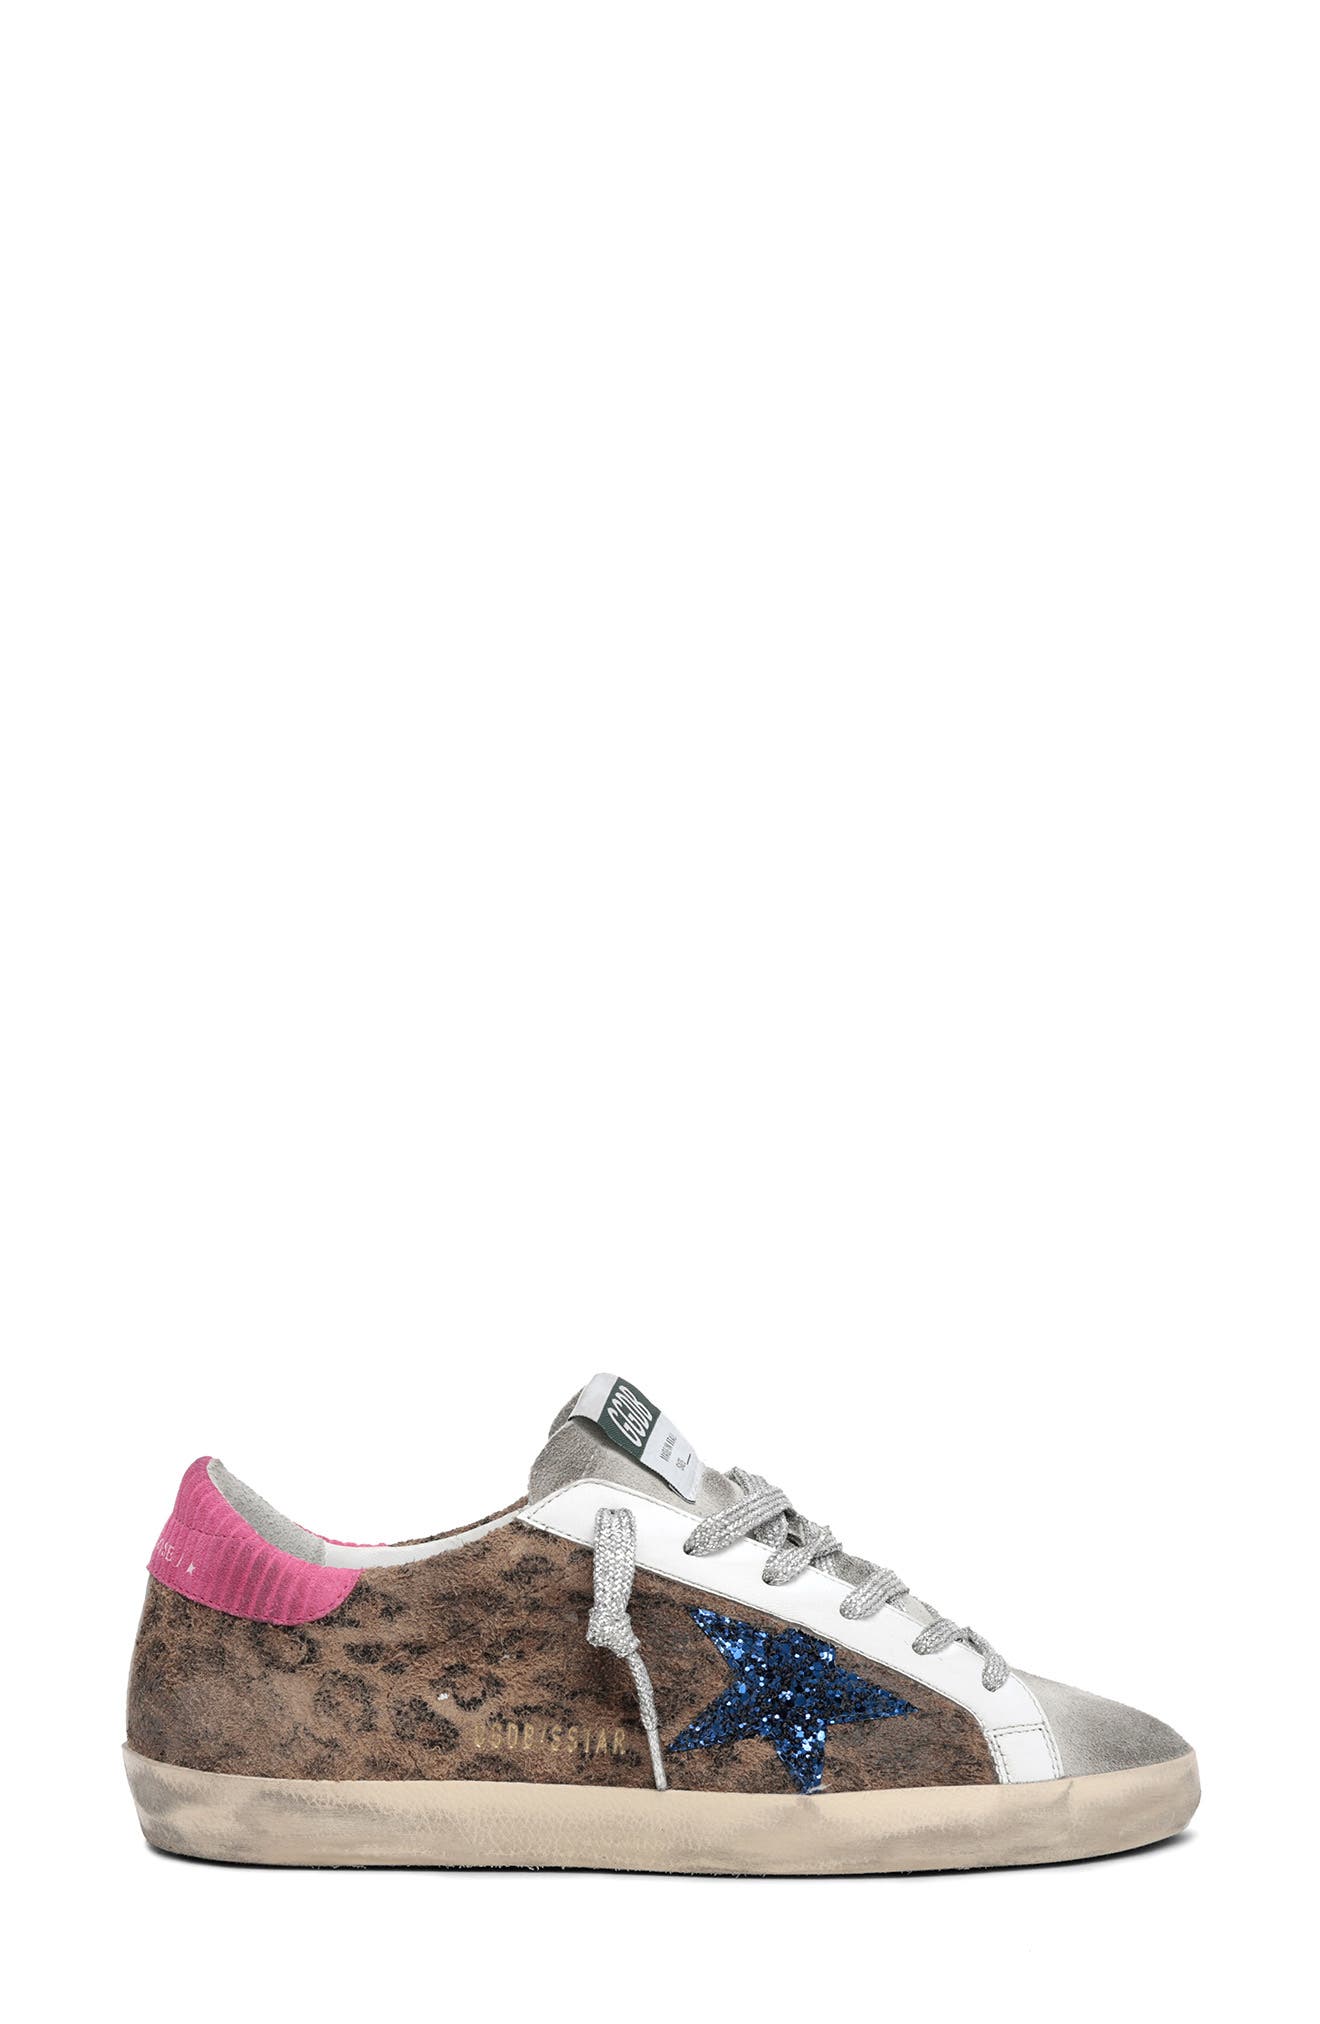 Golden Goose Super-Star Low Top Sneaker in Brown/Blue/Fuxia at Nordstrom, Size 10Us